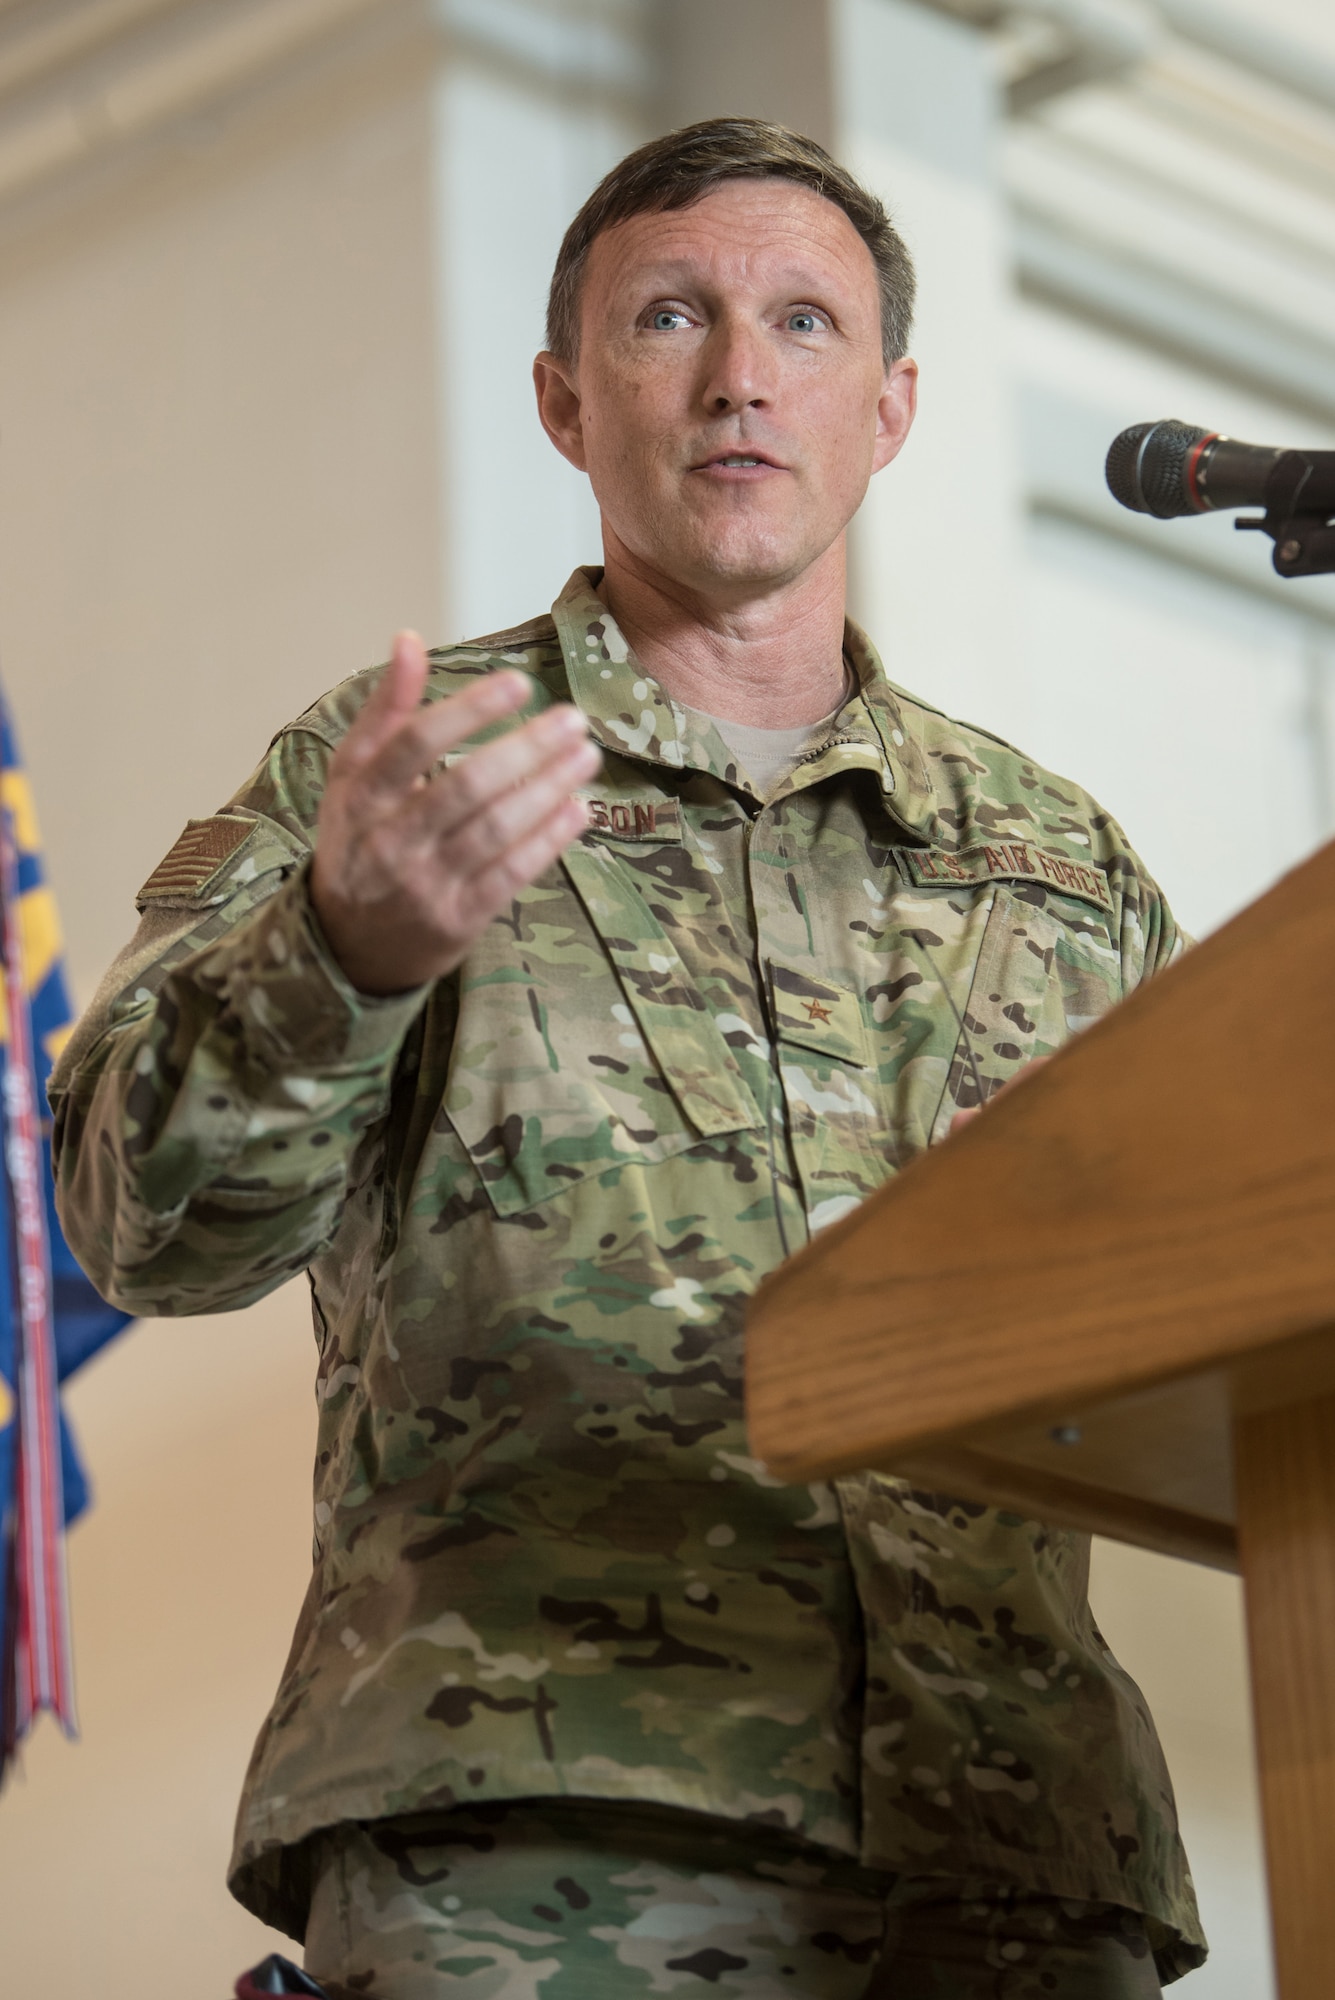 Brig. Gen. Jeffrey Wilkinson, Kentucky’s new assistant adjutant general for Air, speaks at a transfer-of-responsibility ceremony at the Kentucky Air National Guard Base in Louisville, Ky., Aug. 11, 2019. Wilkinson replaces Brig. Gen. Warren Hurst, who held the post for six years. (U.S. Air National Guard photo by Staff Sgt. Joshua Horton)